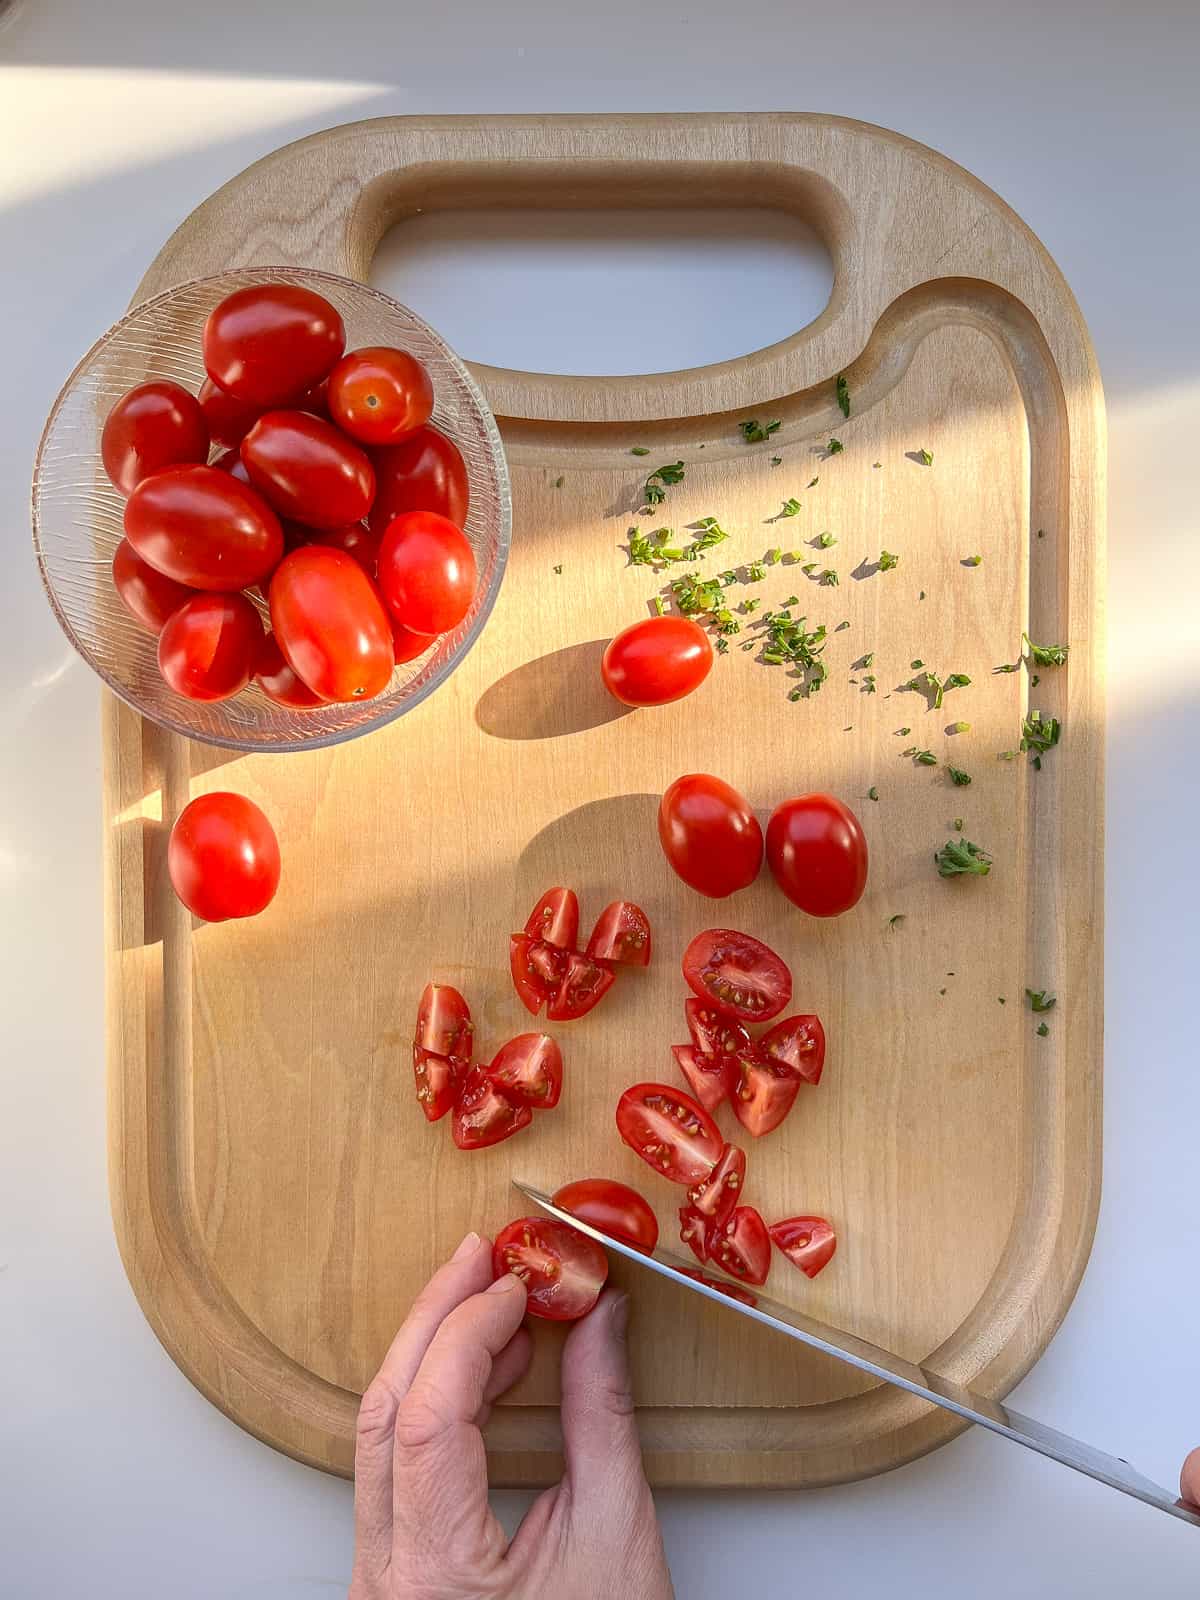 An image of tomatoes being cut on a wooden cutting board.